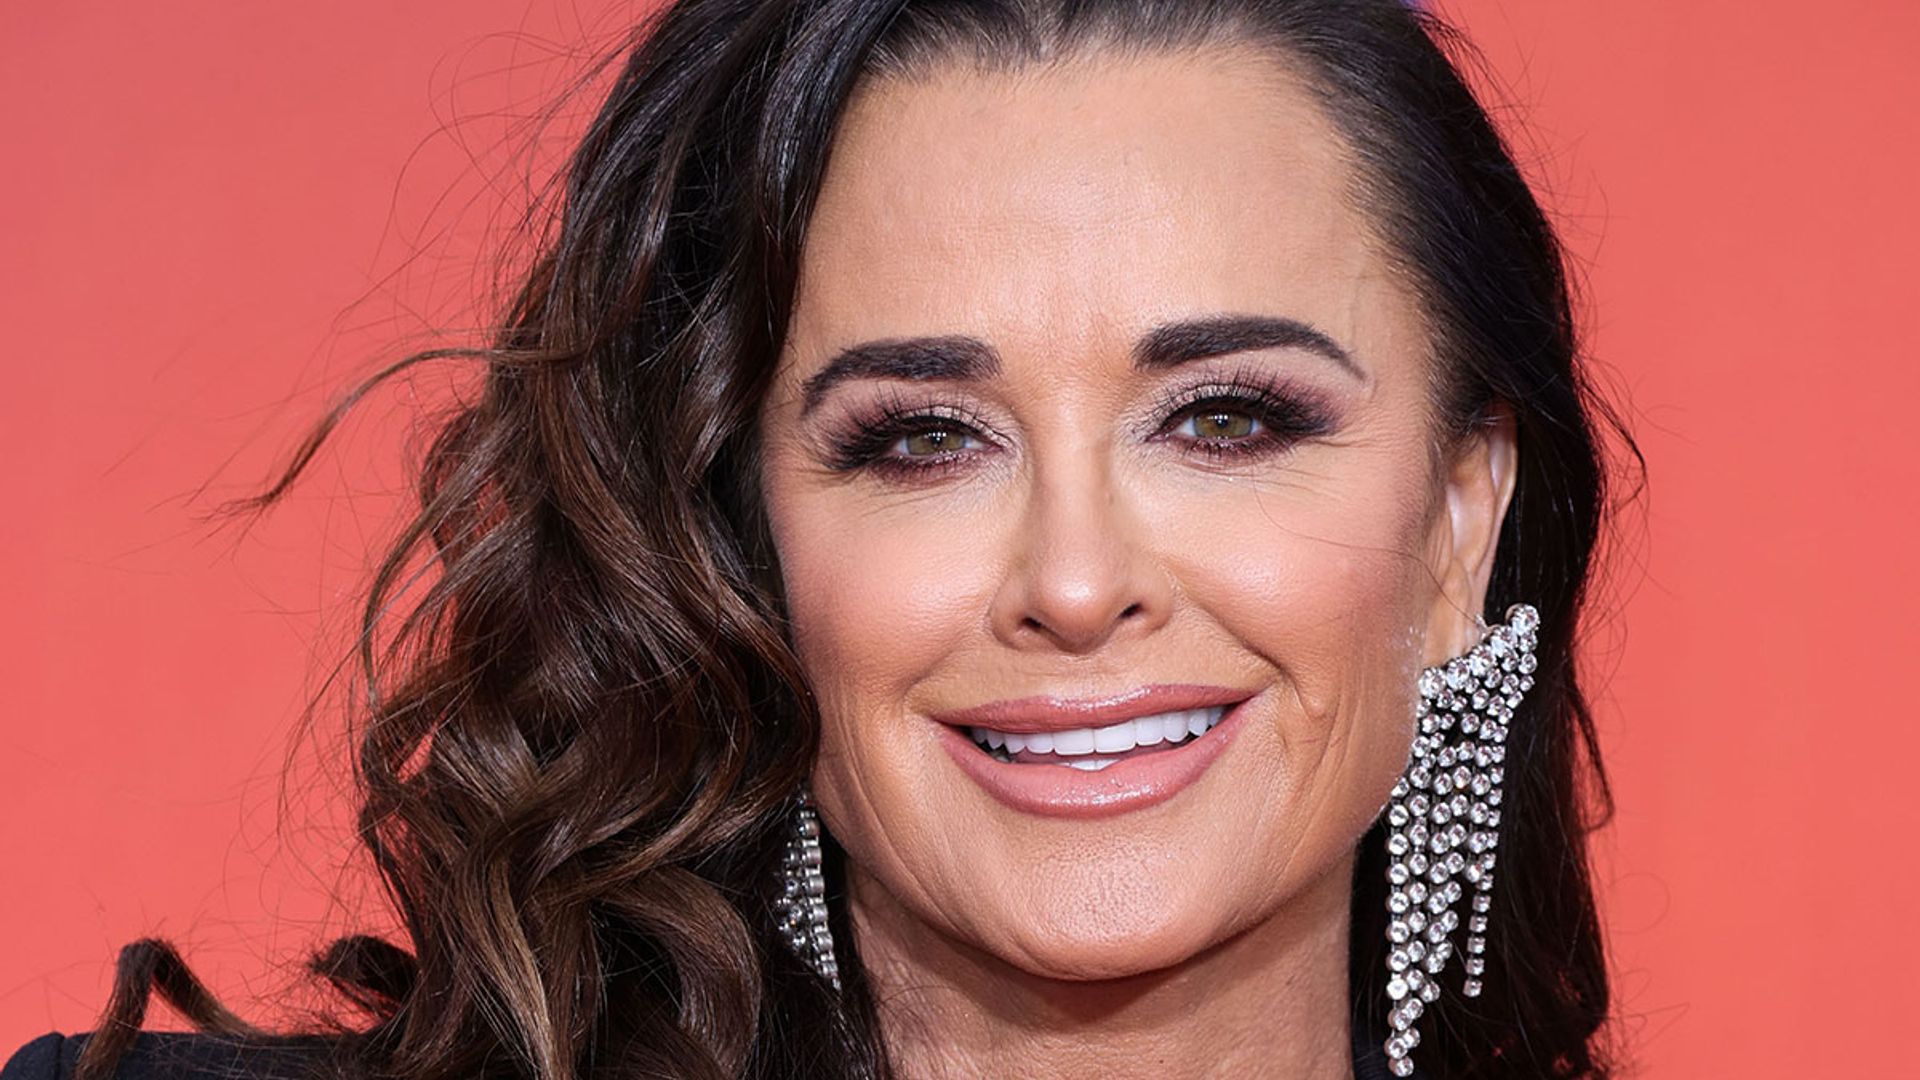 A Look Inside Real Housewives Star Kyle Richards' Spectacular New